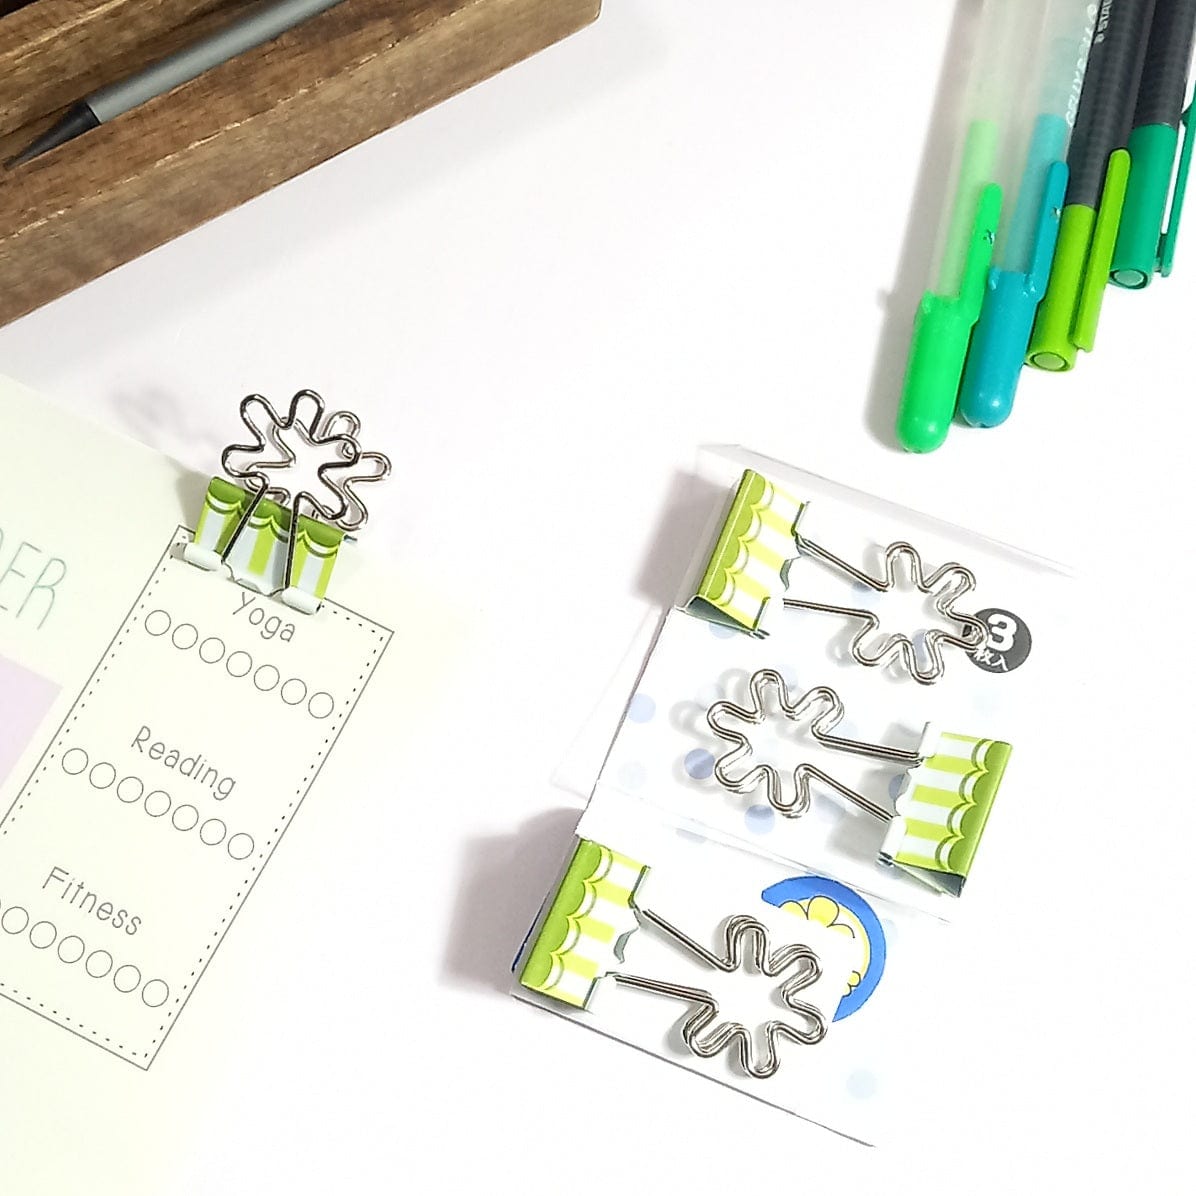 Gifts of Love Growing Plants Binder Clips